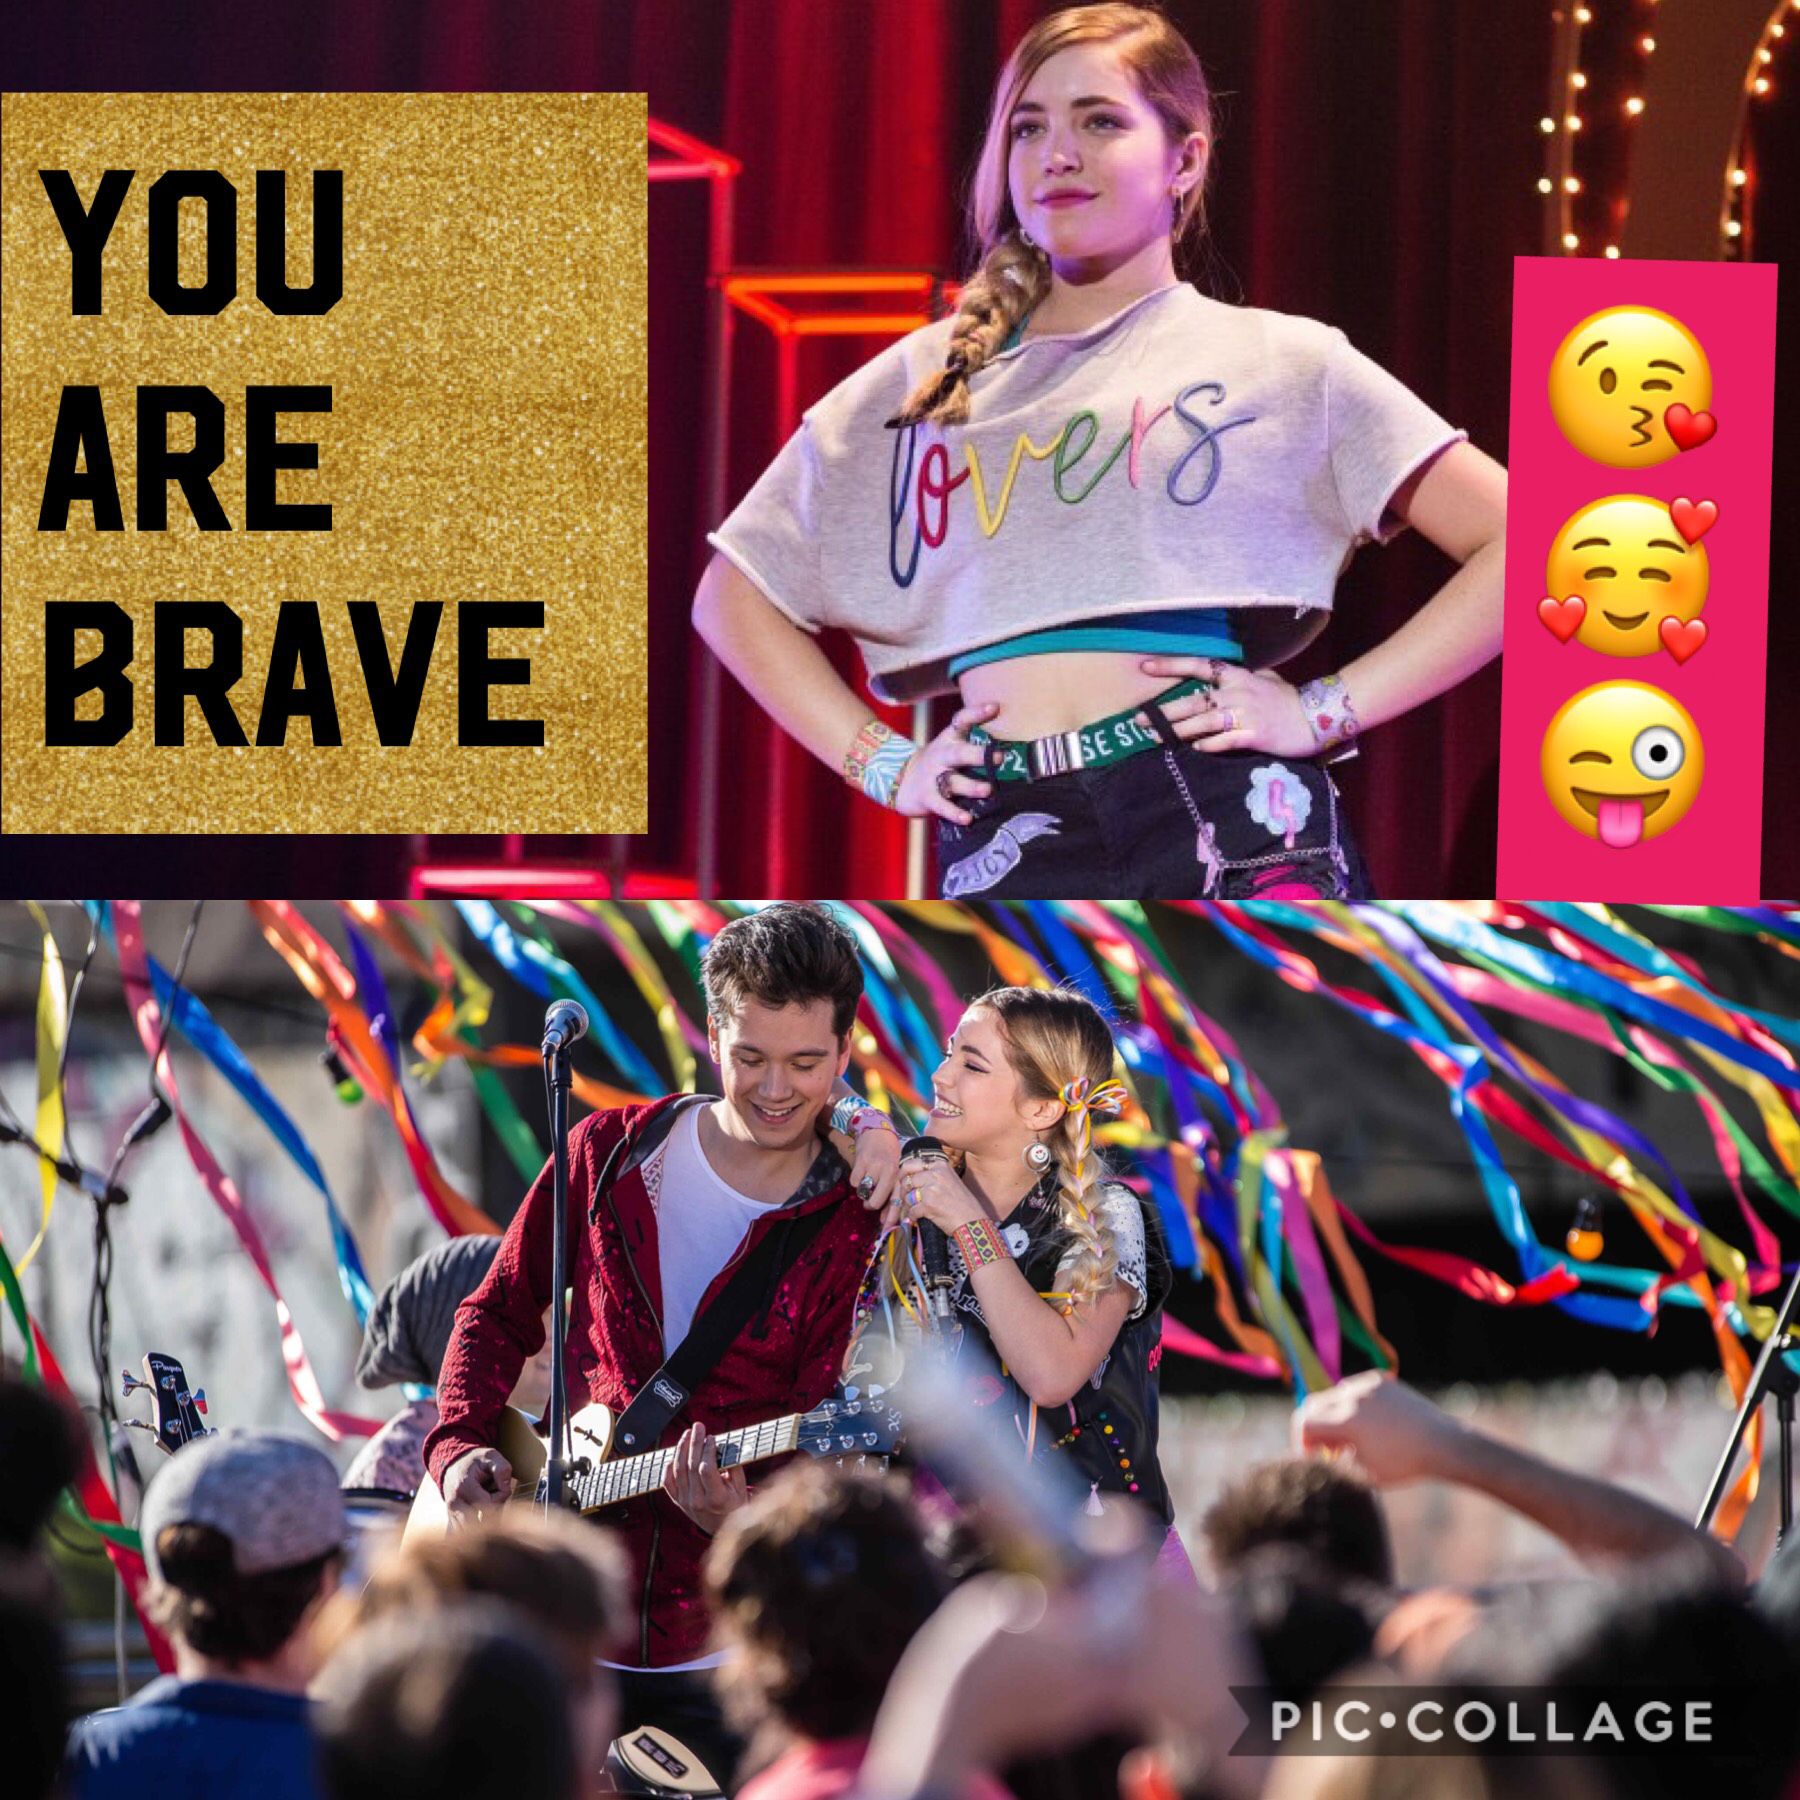 You are brave